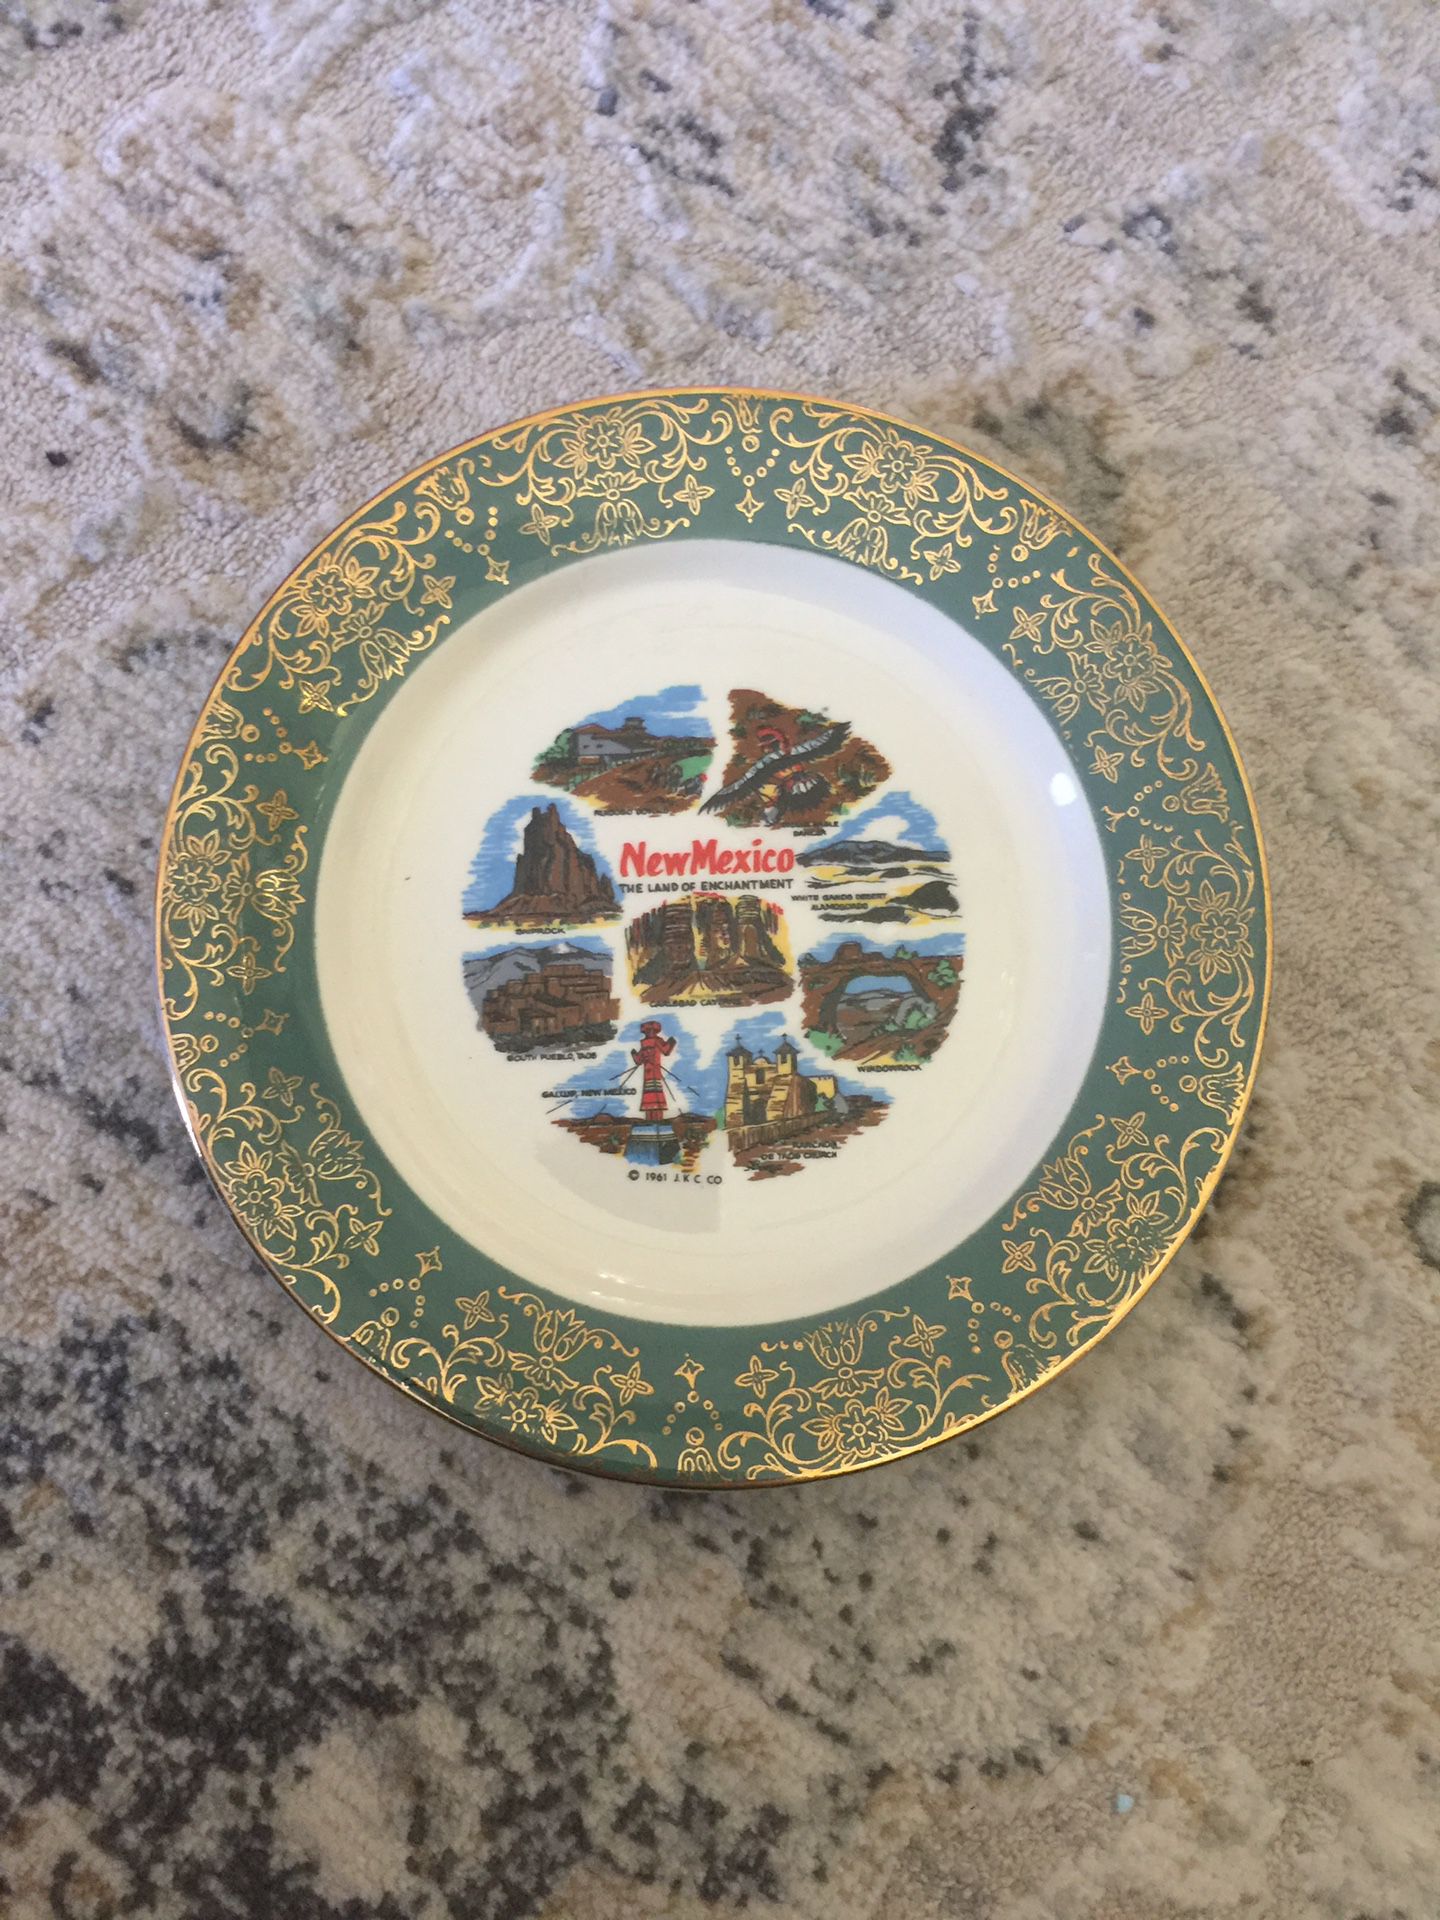 Beautiful New Mexico decorative plate 6 inches X 6 inches